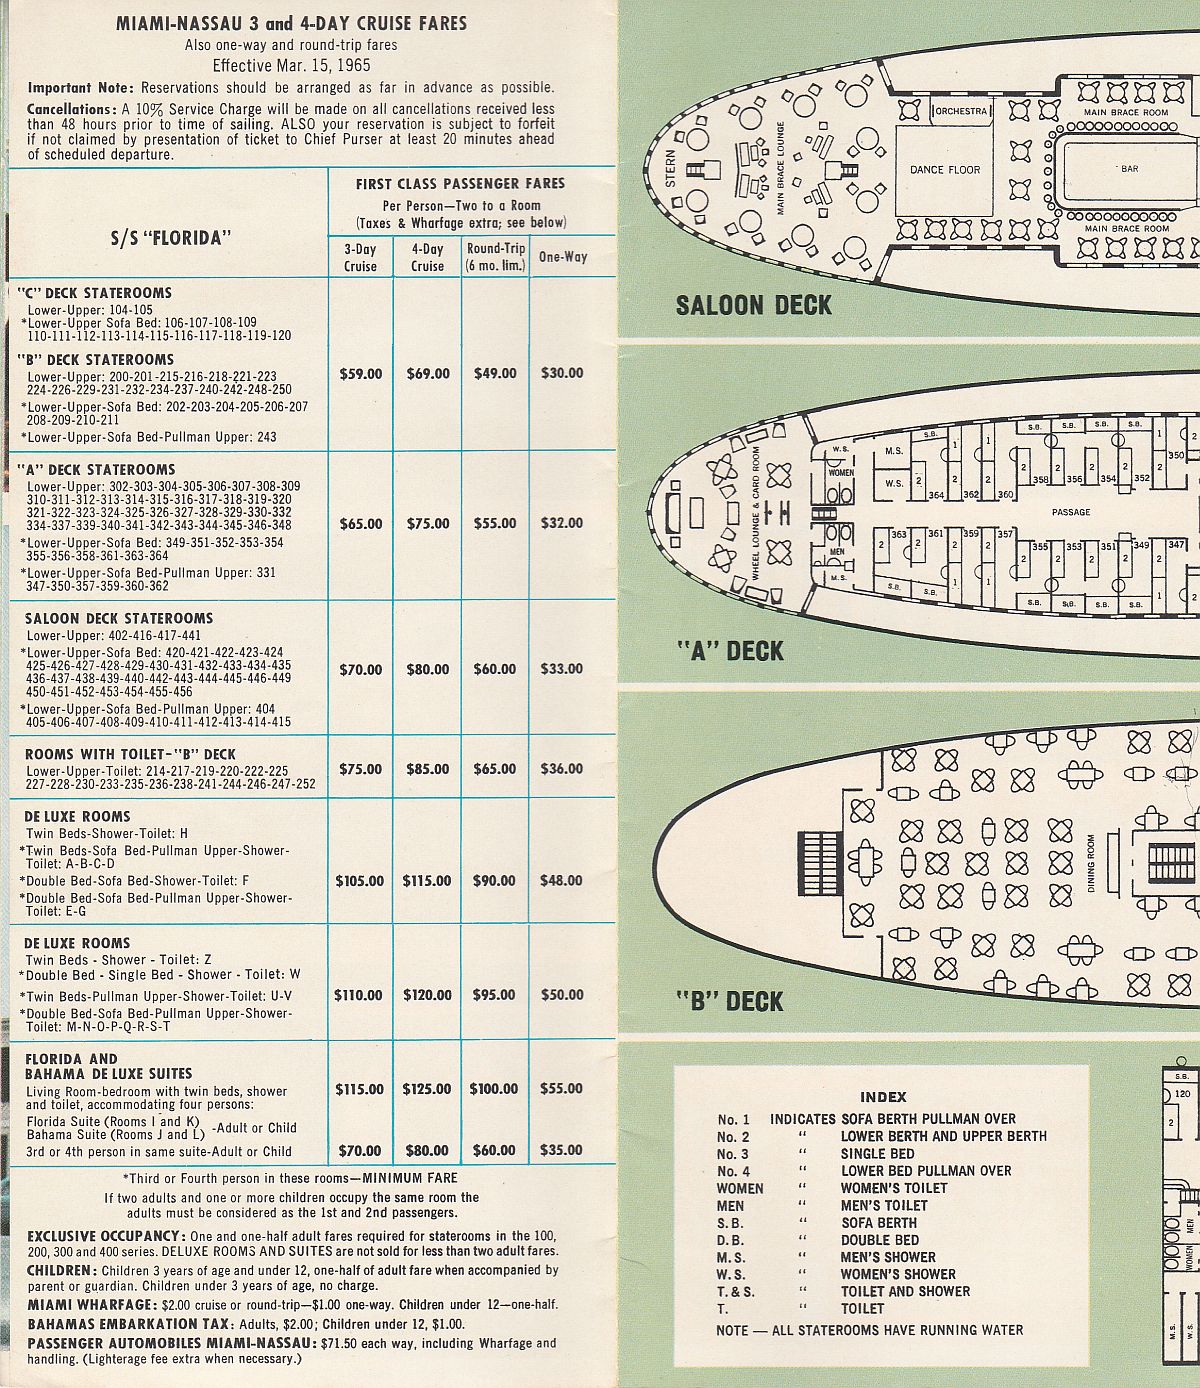 ss Florida Fares & deck plans: Miami-Nassau cruise fares and left page of deck plans